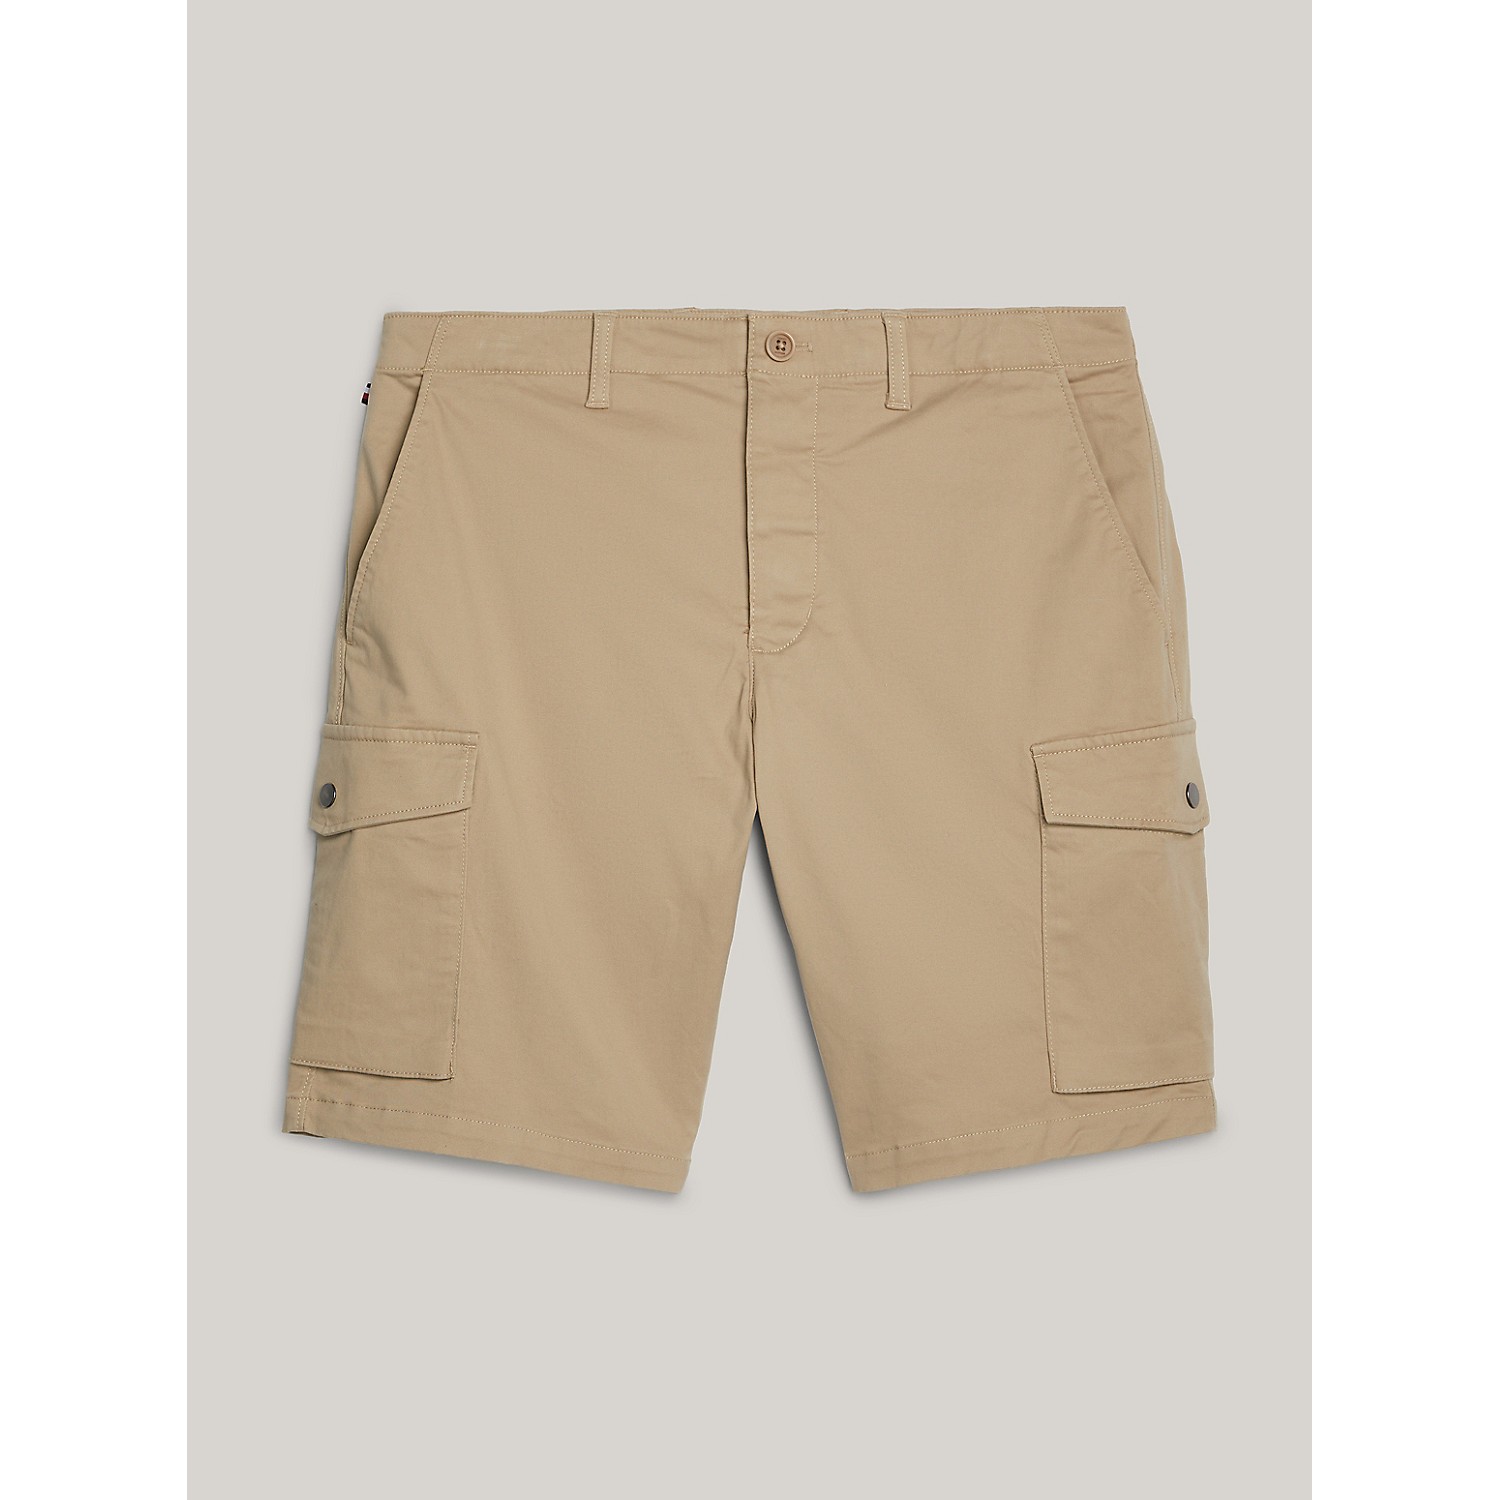 TOMMY HILFIGER Relaxed Fit 1985 Cargo Short